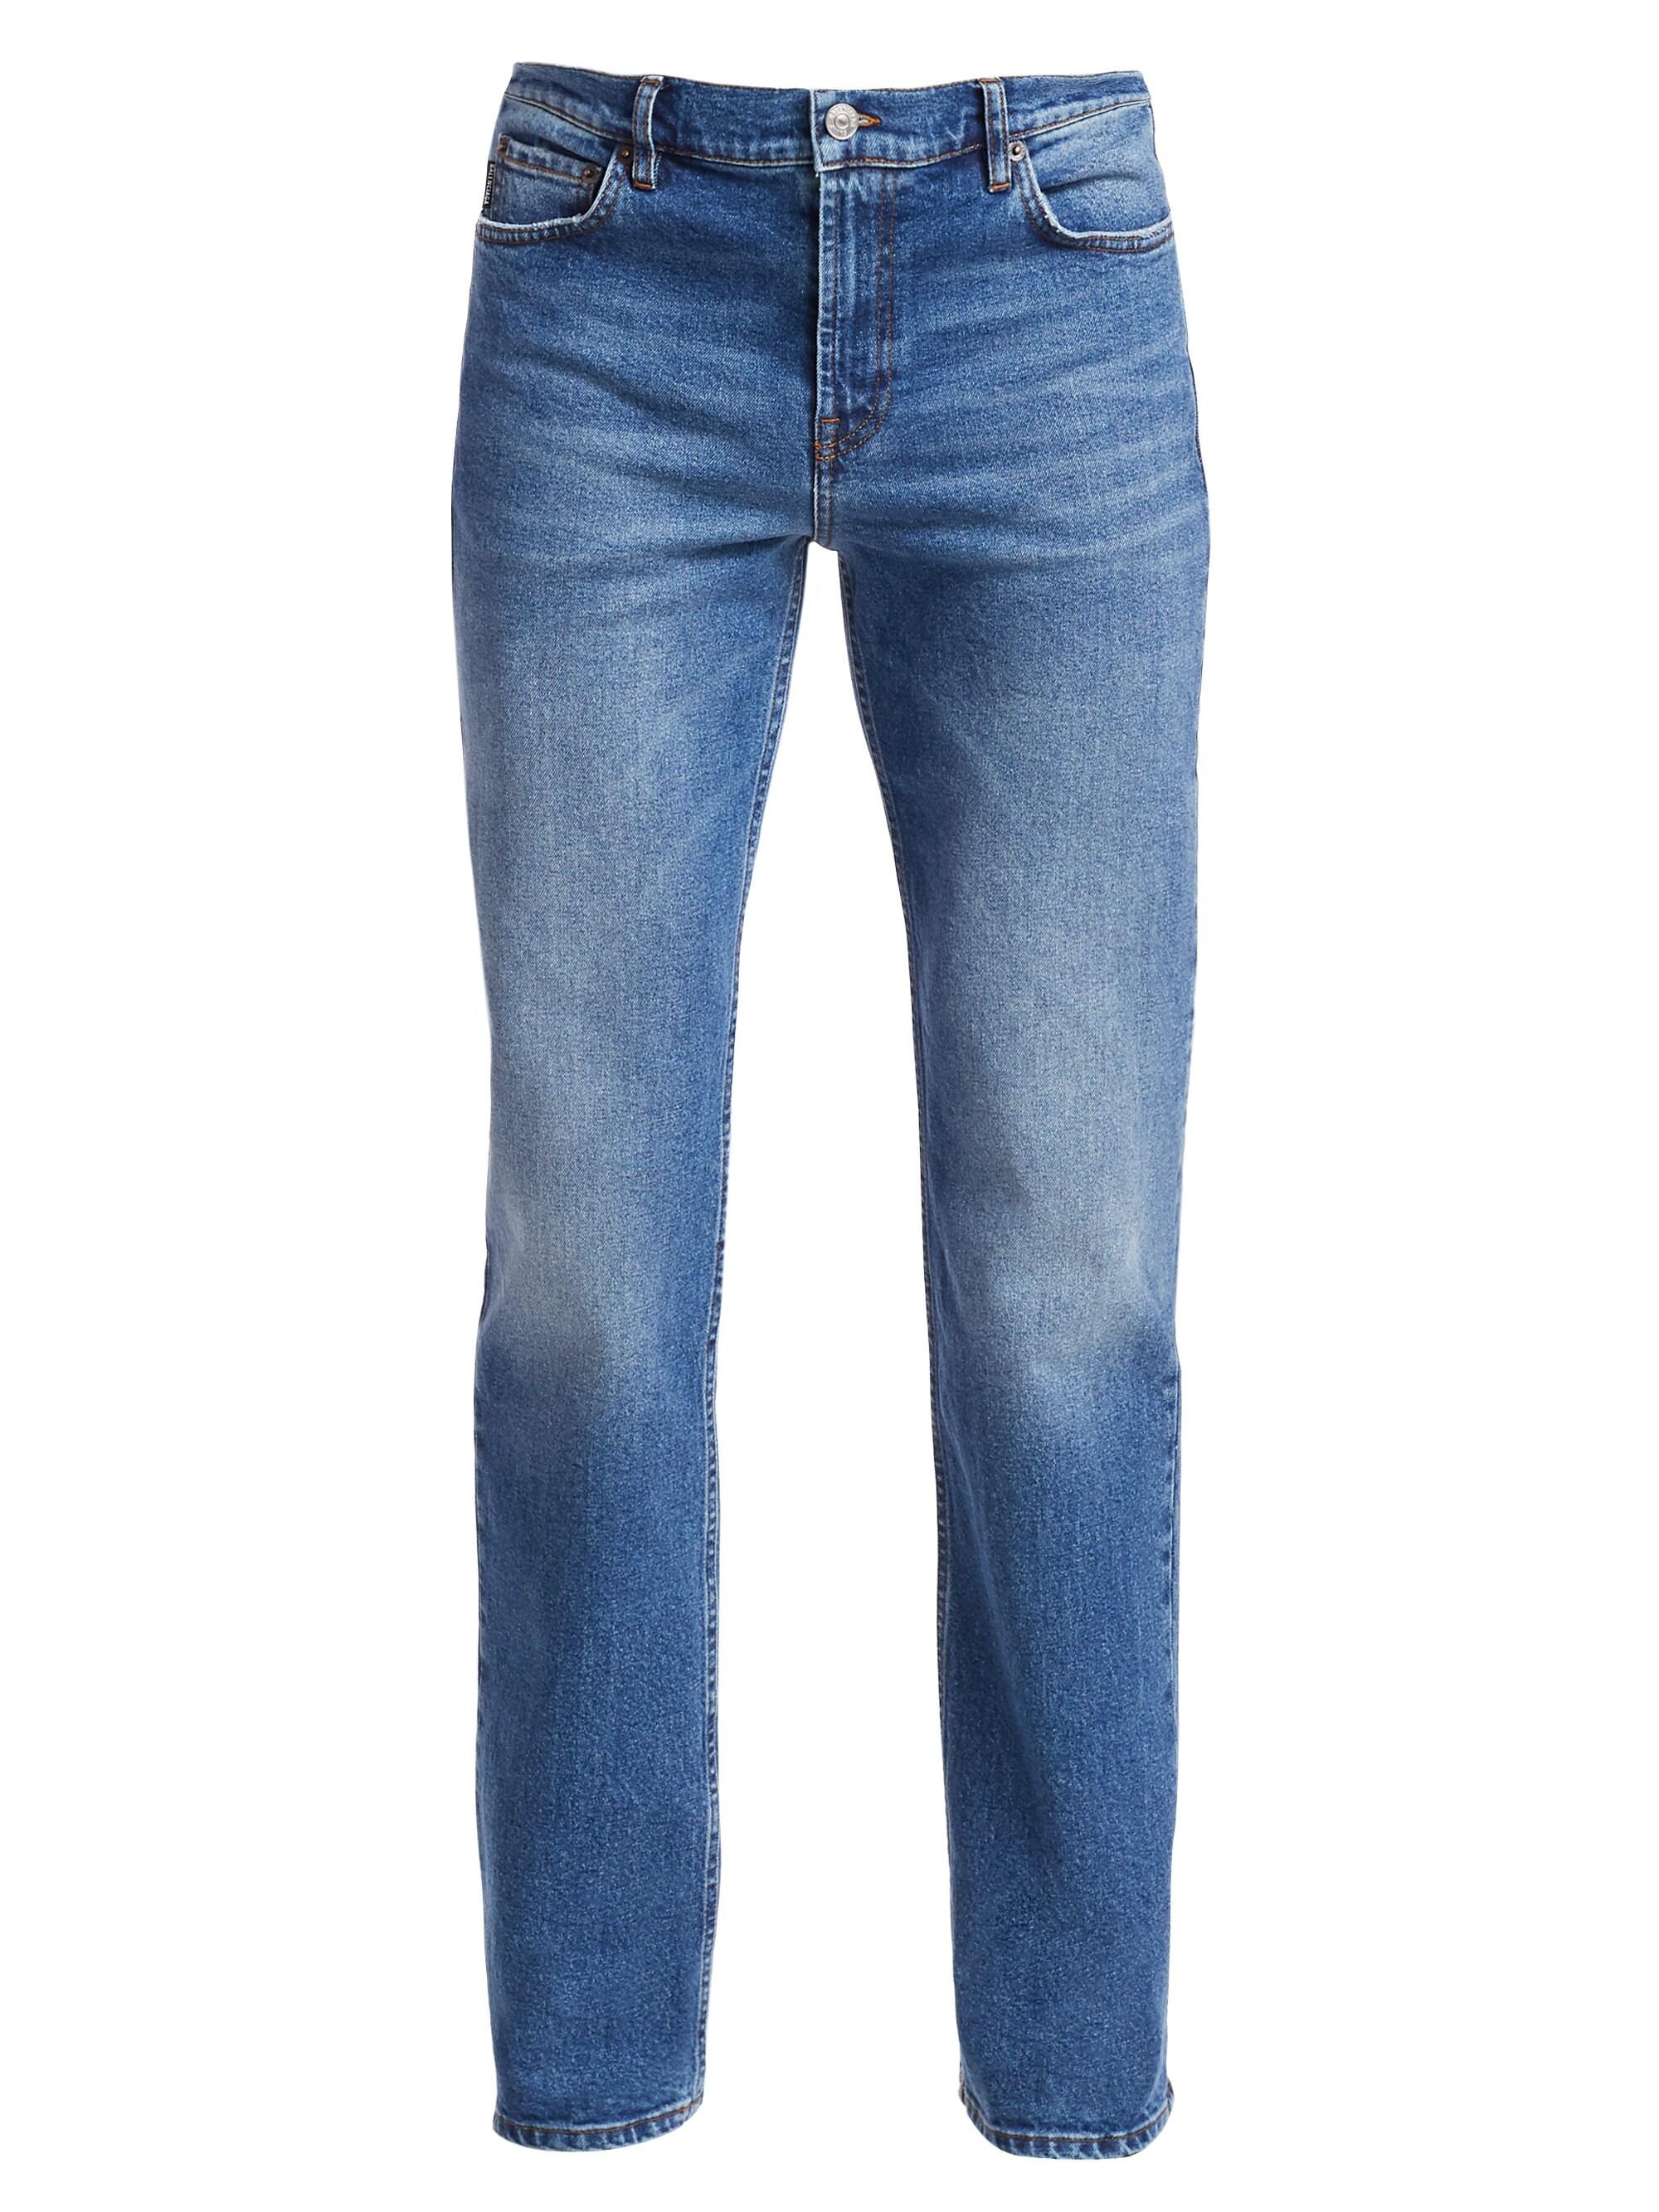 Balenciaga Distressed Straight-leg Jeans in Blue for Men - Lyst